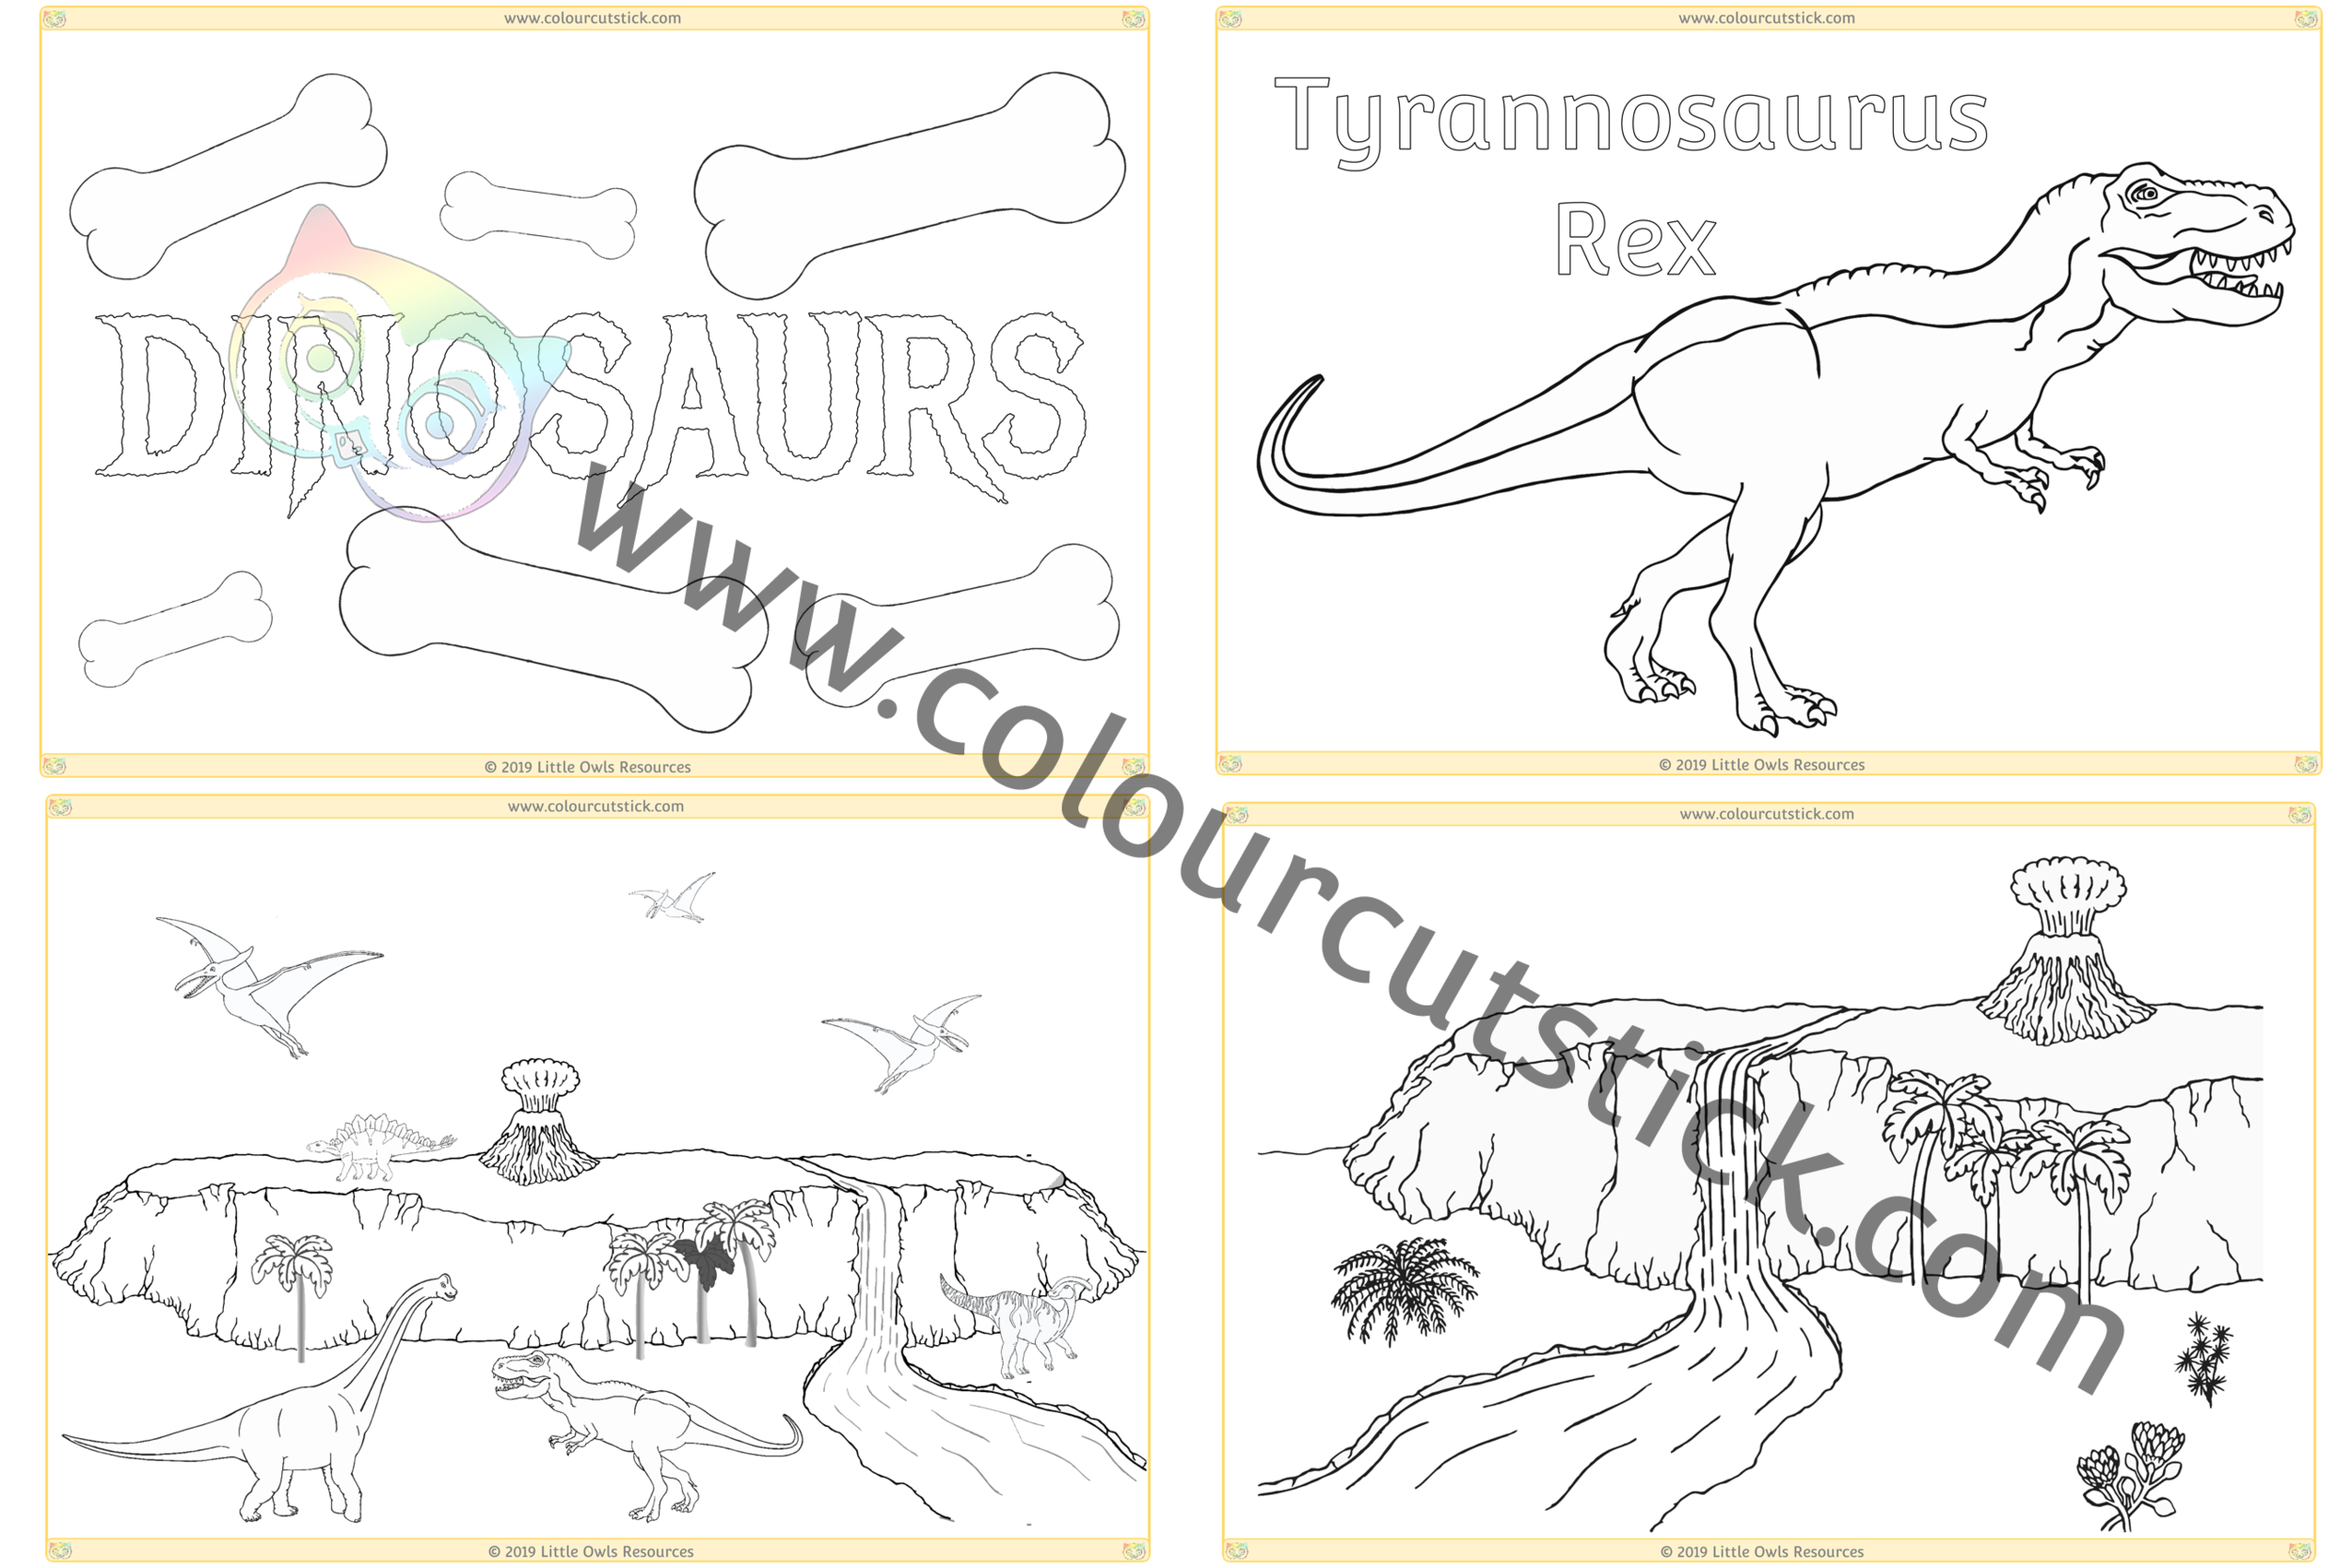 Download FREE Dinosaurs Colouring/Coloring Pack - for Children, Preschool, Early Years, Home School ...